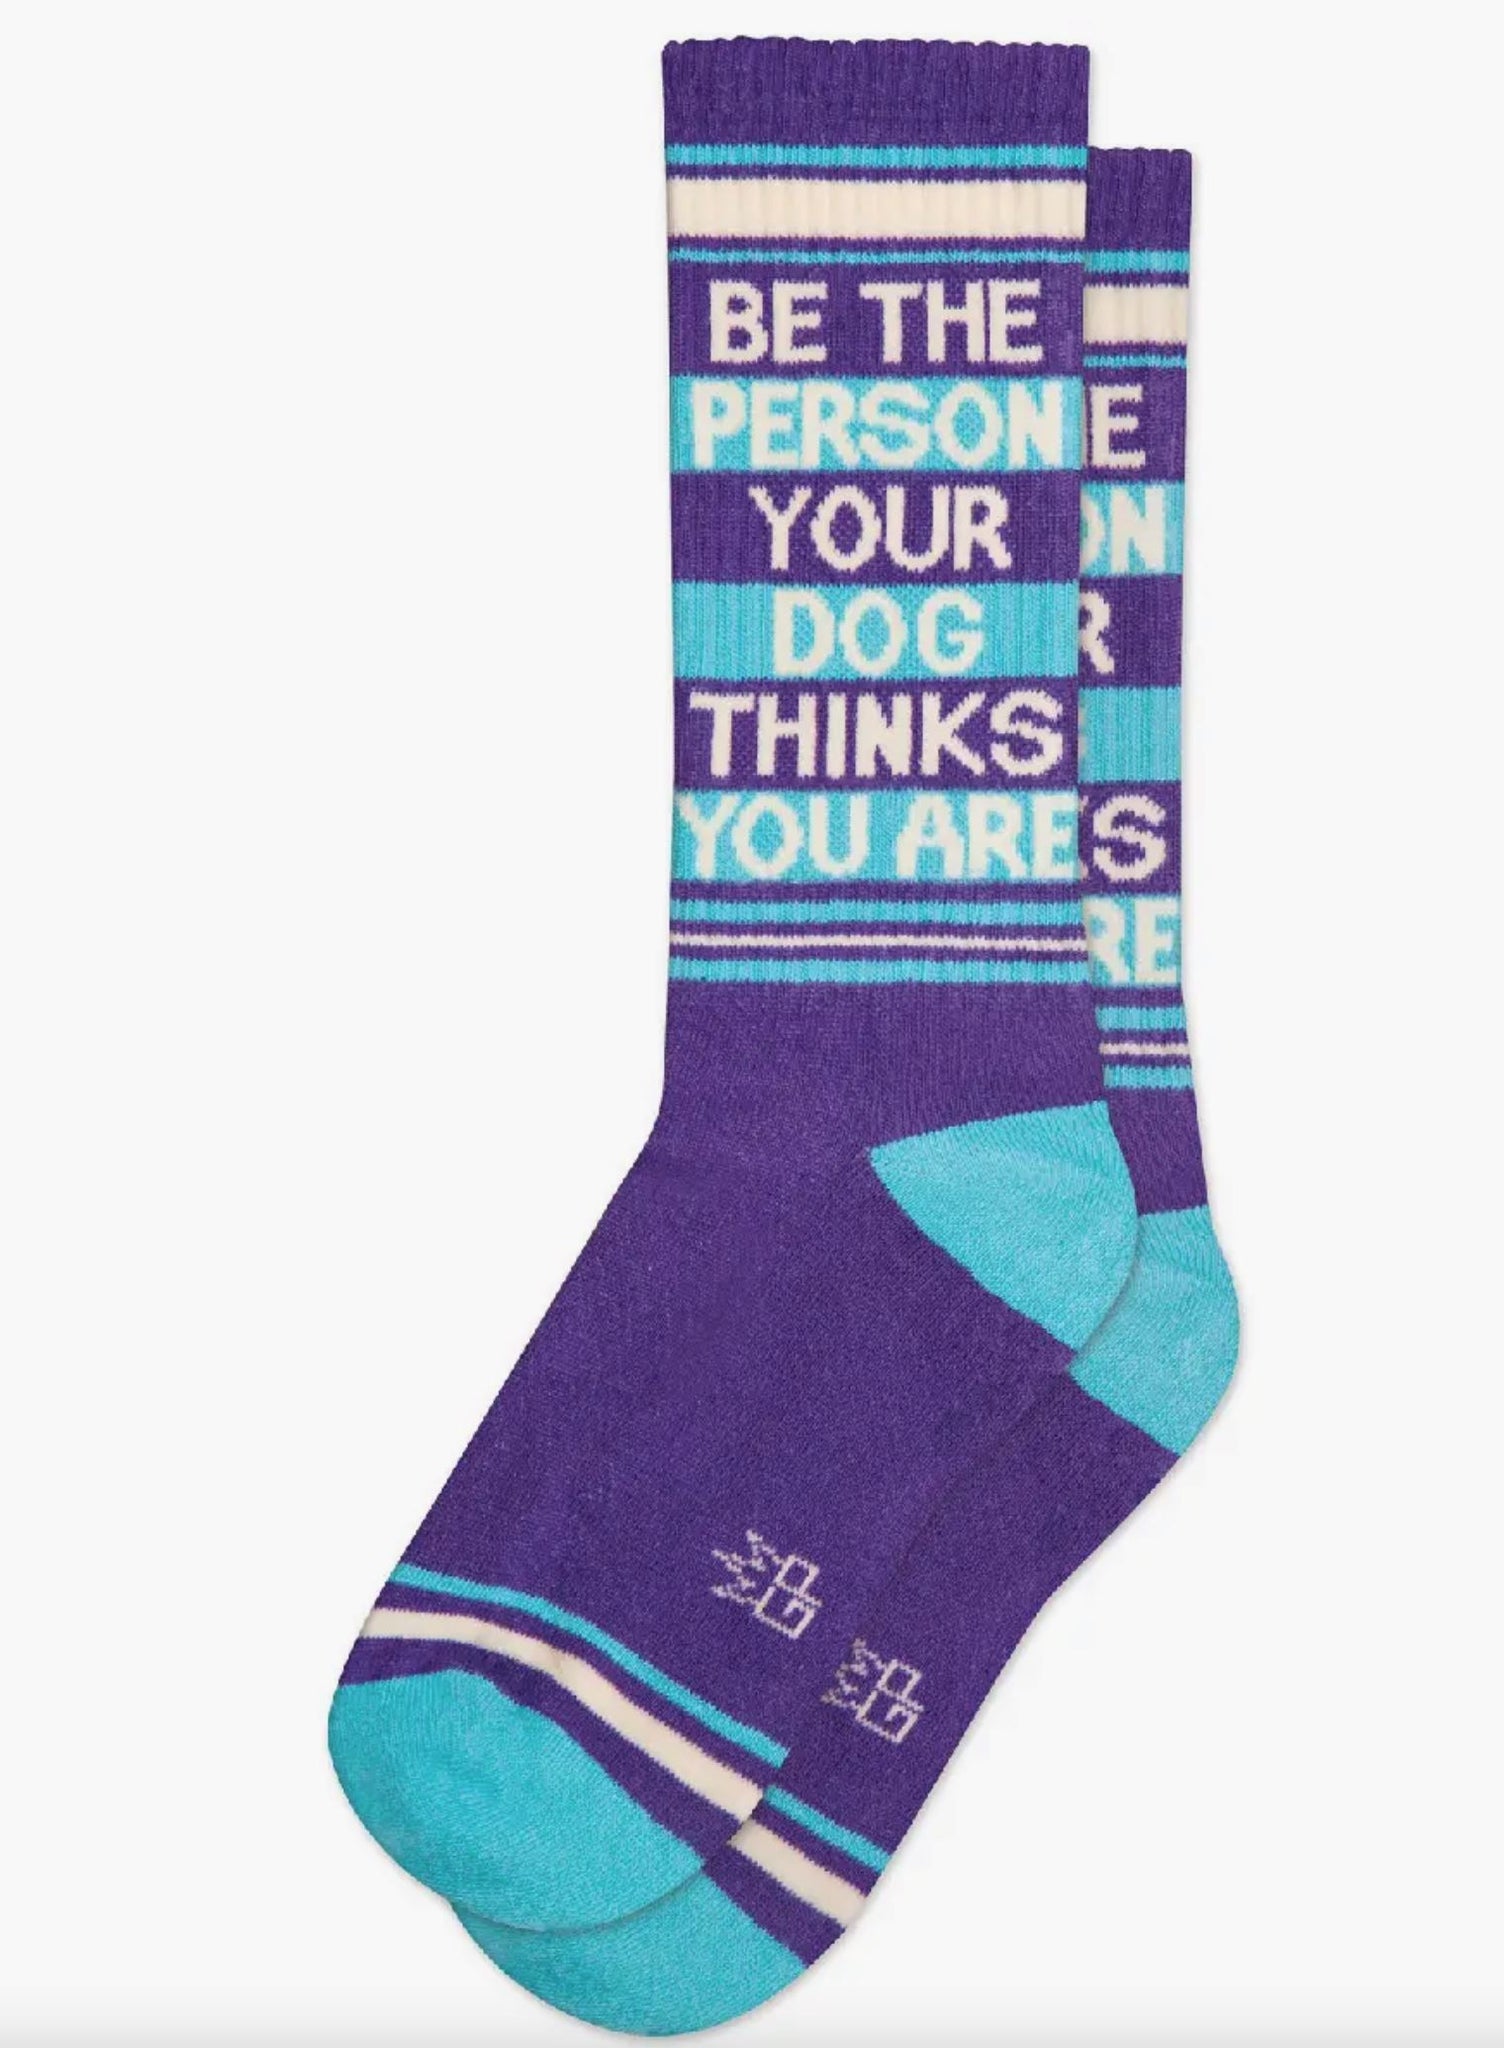 Be The Person Your Dog Thinks You Are Gym Socks x Gumball Poodle - Third Drawer Down